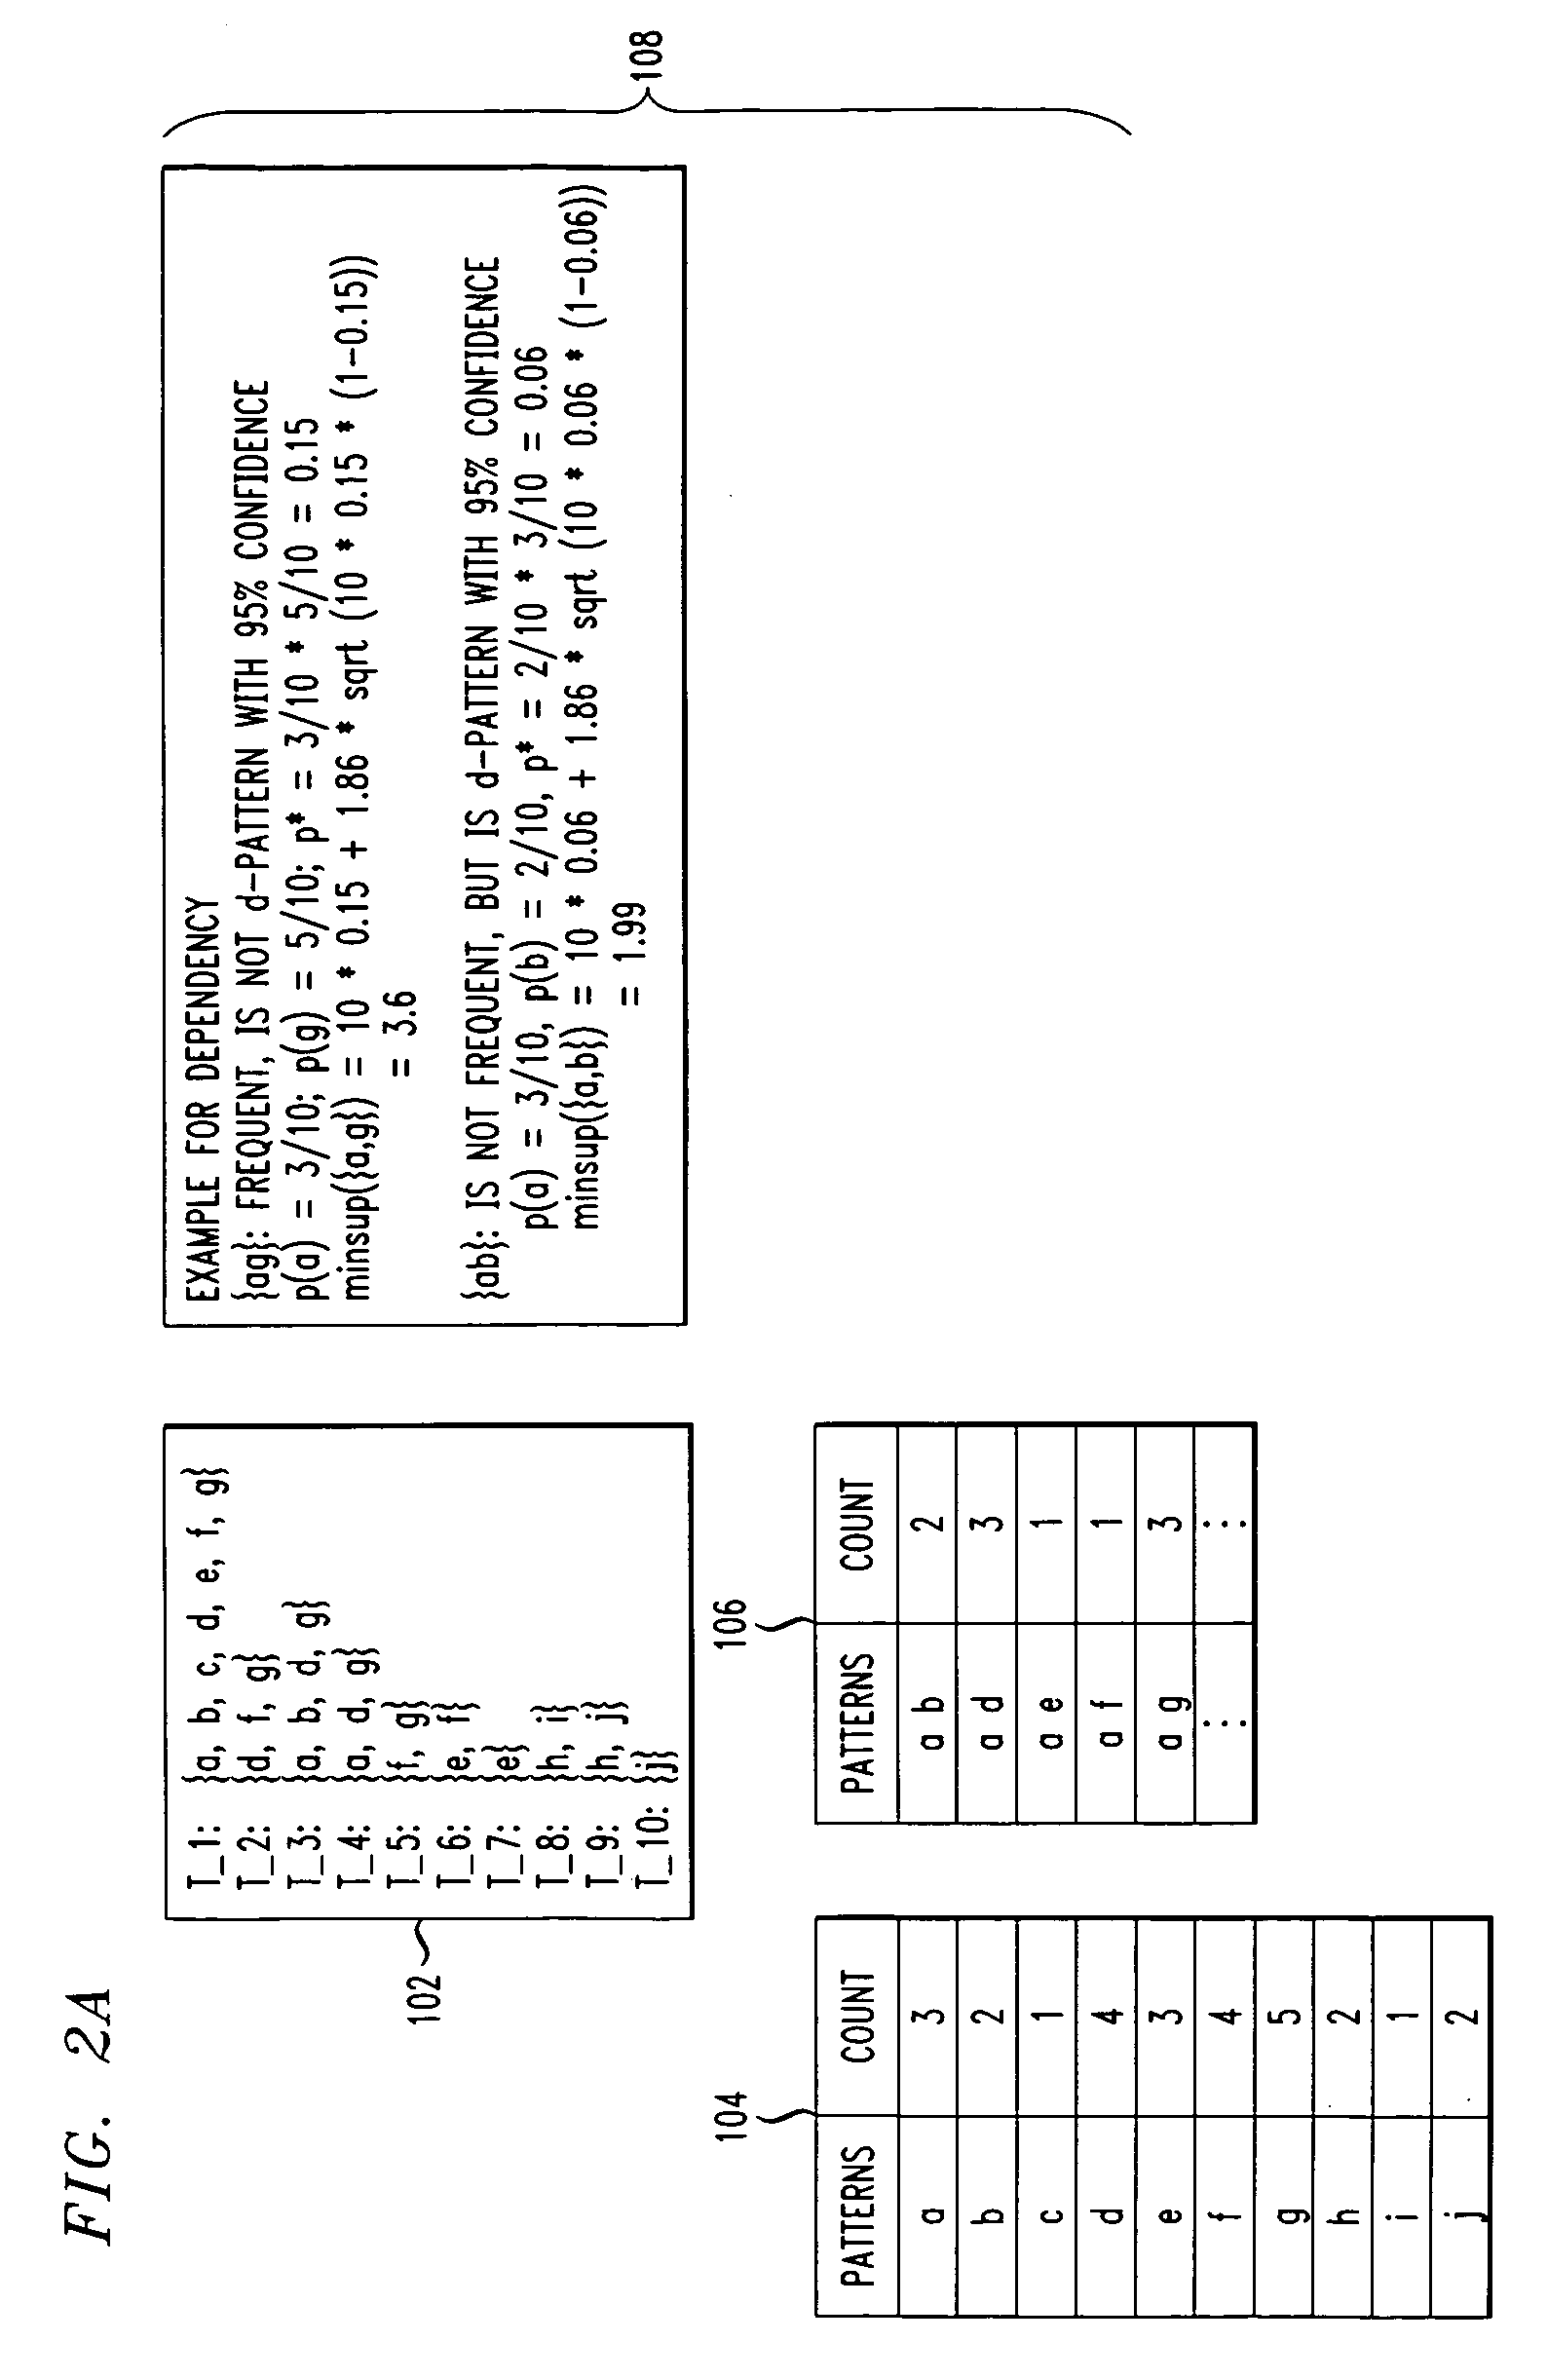 Systems and methods for discovering fully dependent patterns